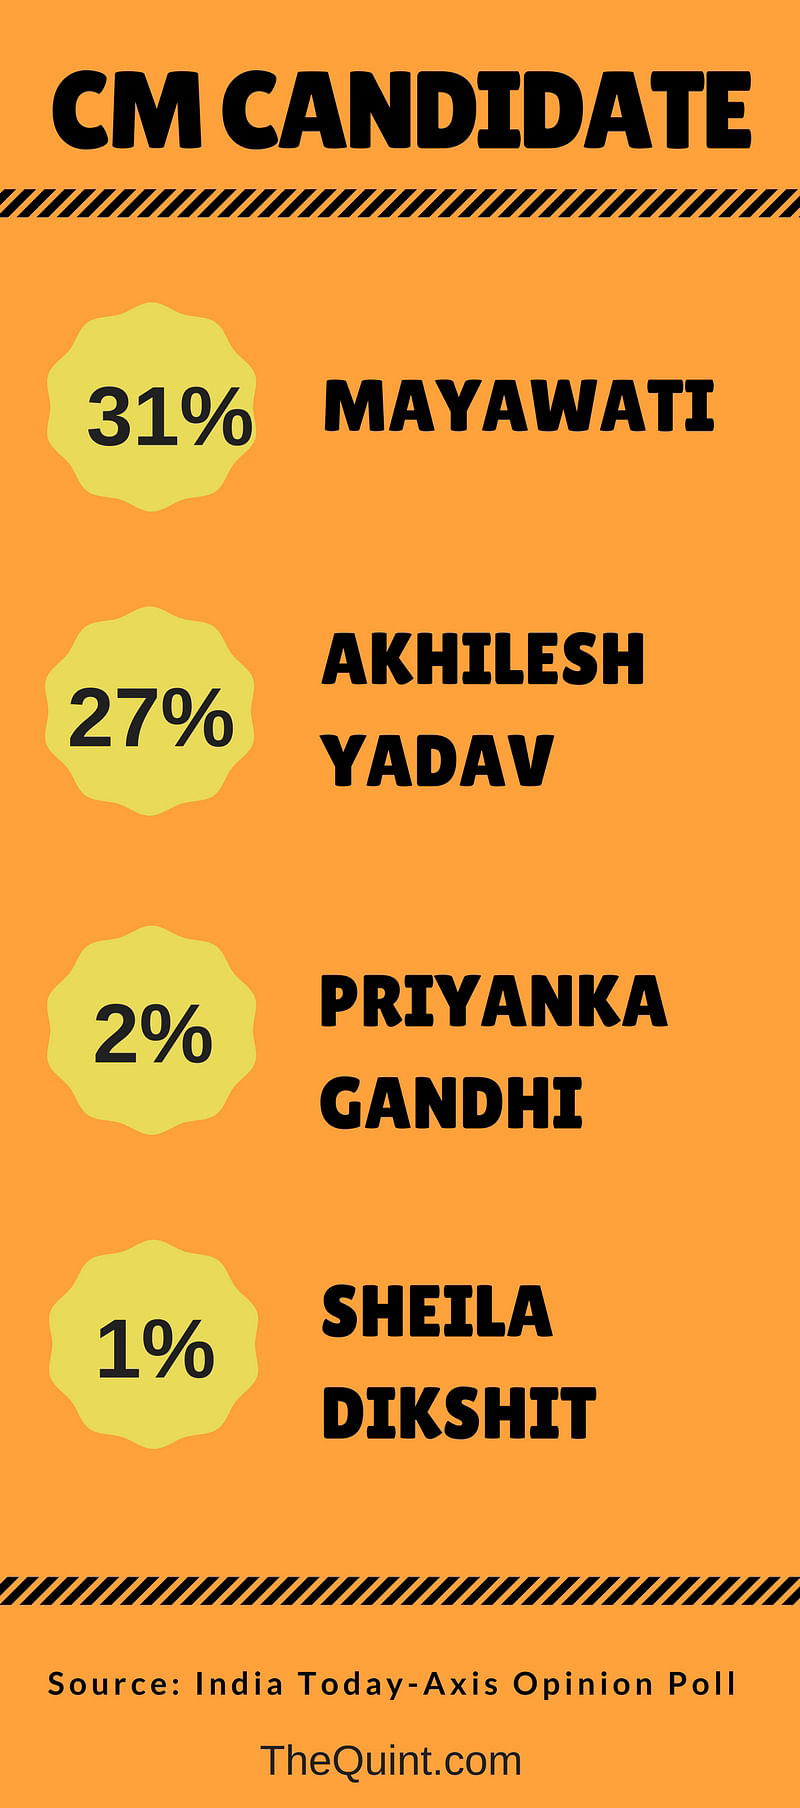  The incumbent Samajwadi Party is expected be at third spot with 94 to 103 seats, according to the poll.